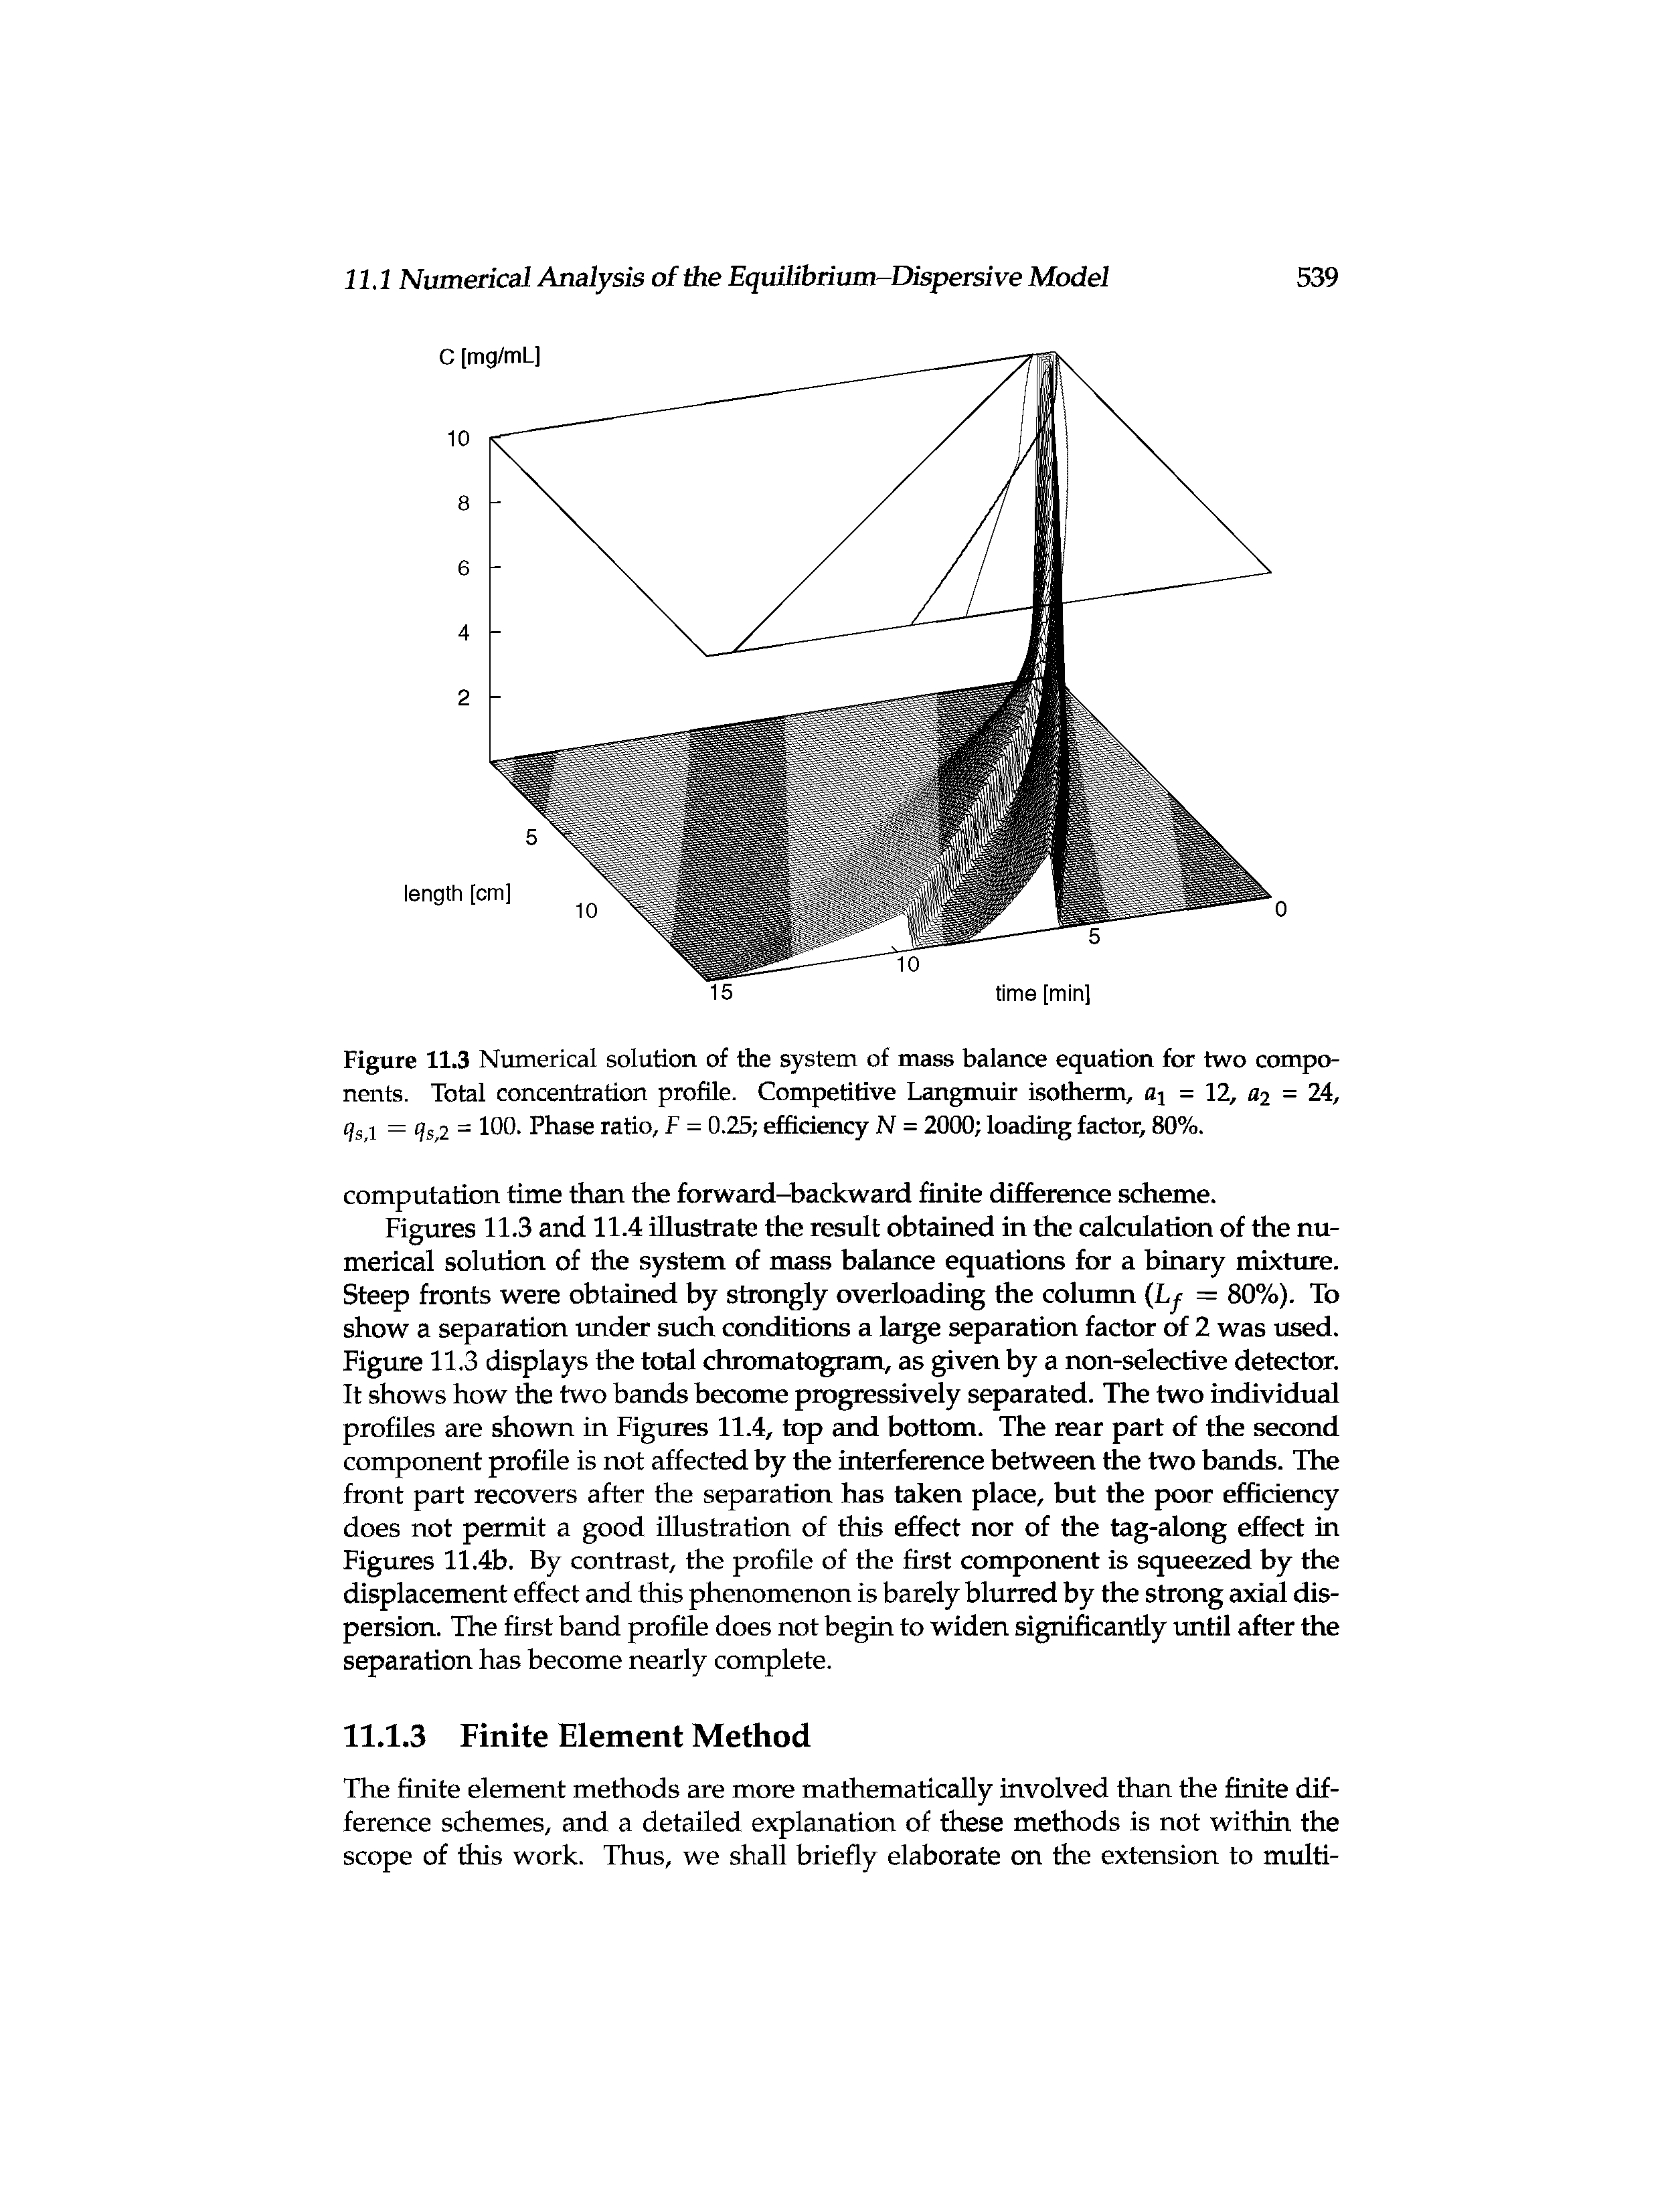 Figure 11.3 Numerical solution of the system of mass balance equation for two components. Total concentration profile. Competitive Langmuir isotherm, O] = 12, U2 = 24, j = q 2 = 100. Phase ratio, f = 0.25 efficiency N = 2000 loading factor, 80%.